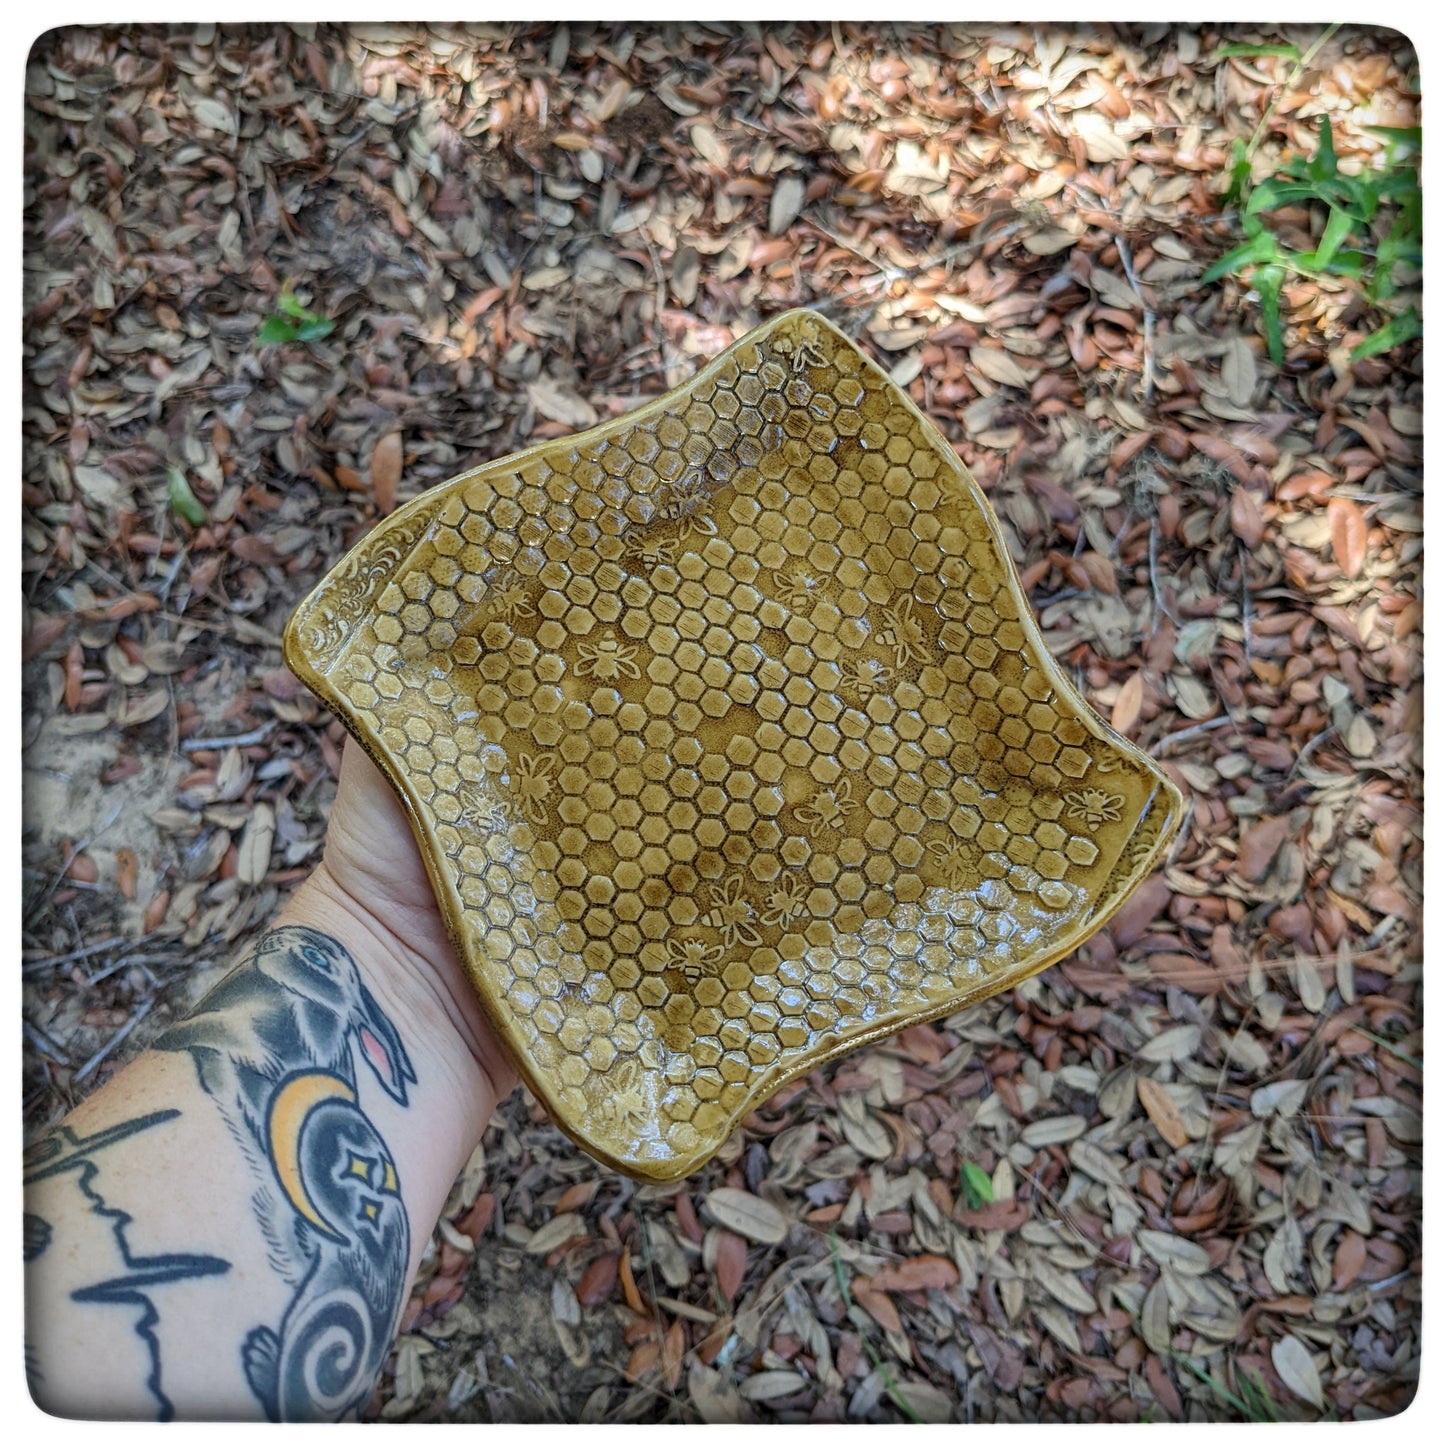 Honeycomb swoopy square plate (5.5 inch)